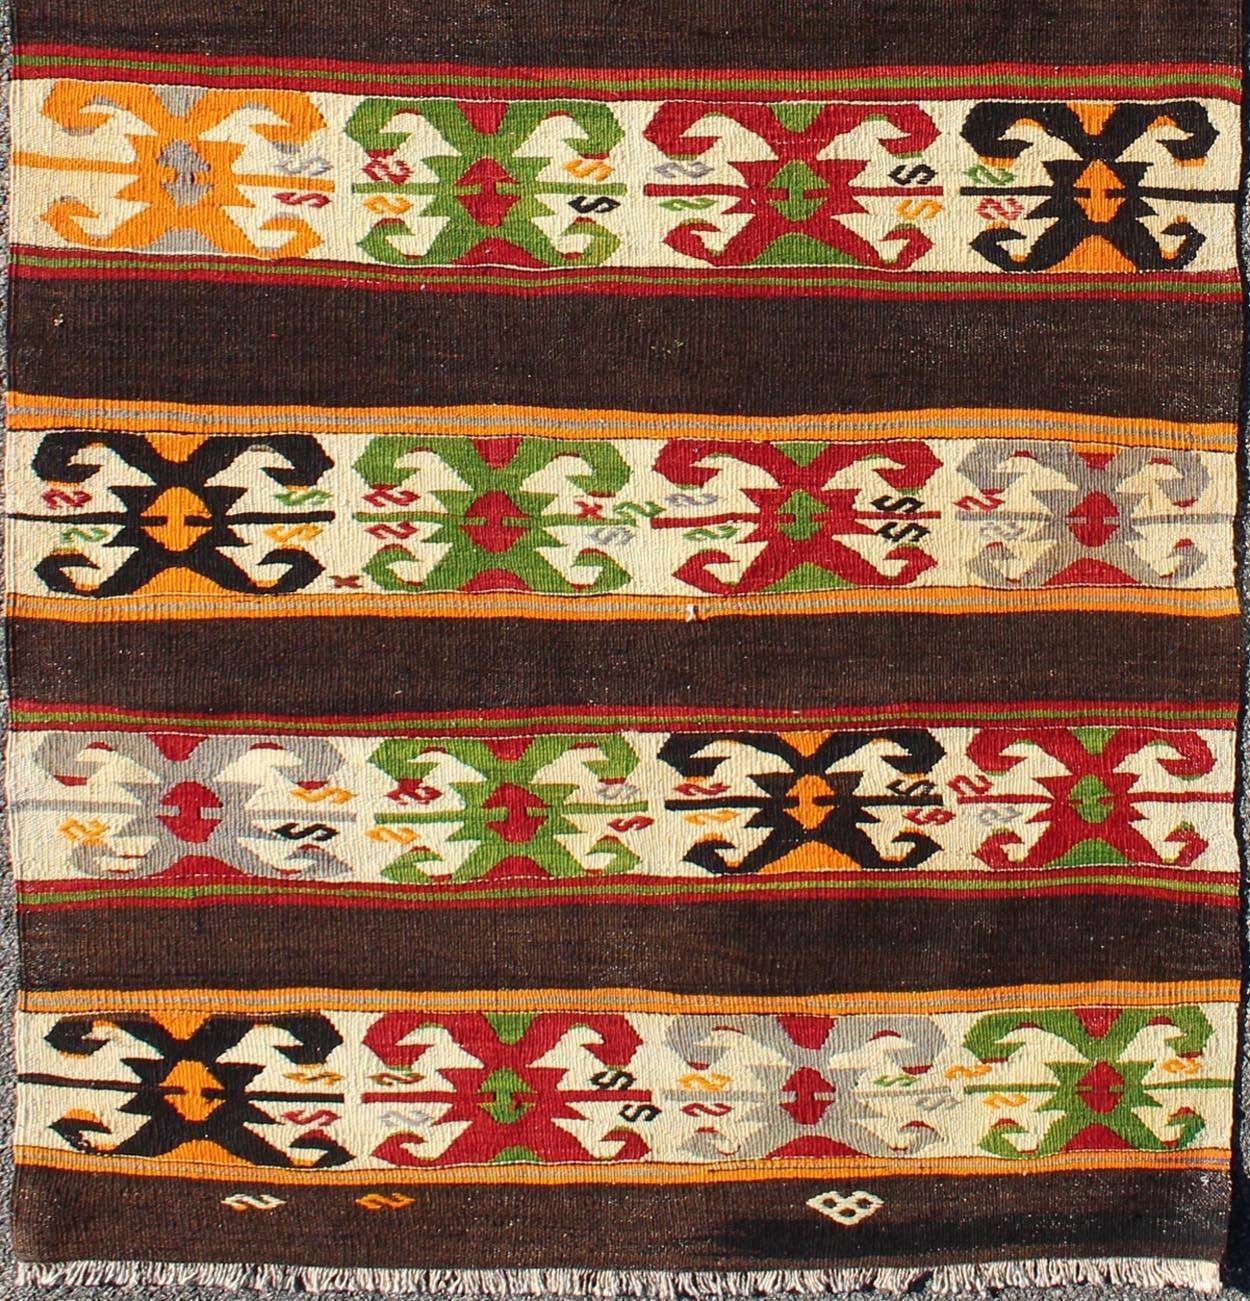 Vintage Turkish Kilim rug with colorful tribal stripes on charcoal background, rug ned-132, country of origin / type: Turkey / Kilim, circa mid-20th century

Featuring tribal elements rendered in a repeating horizontal stripe design, this unique